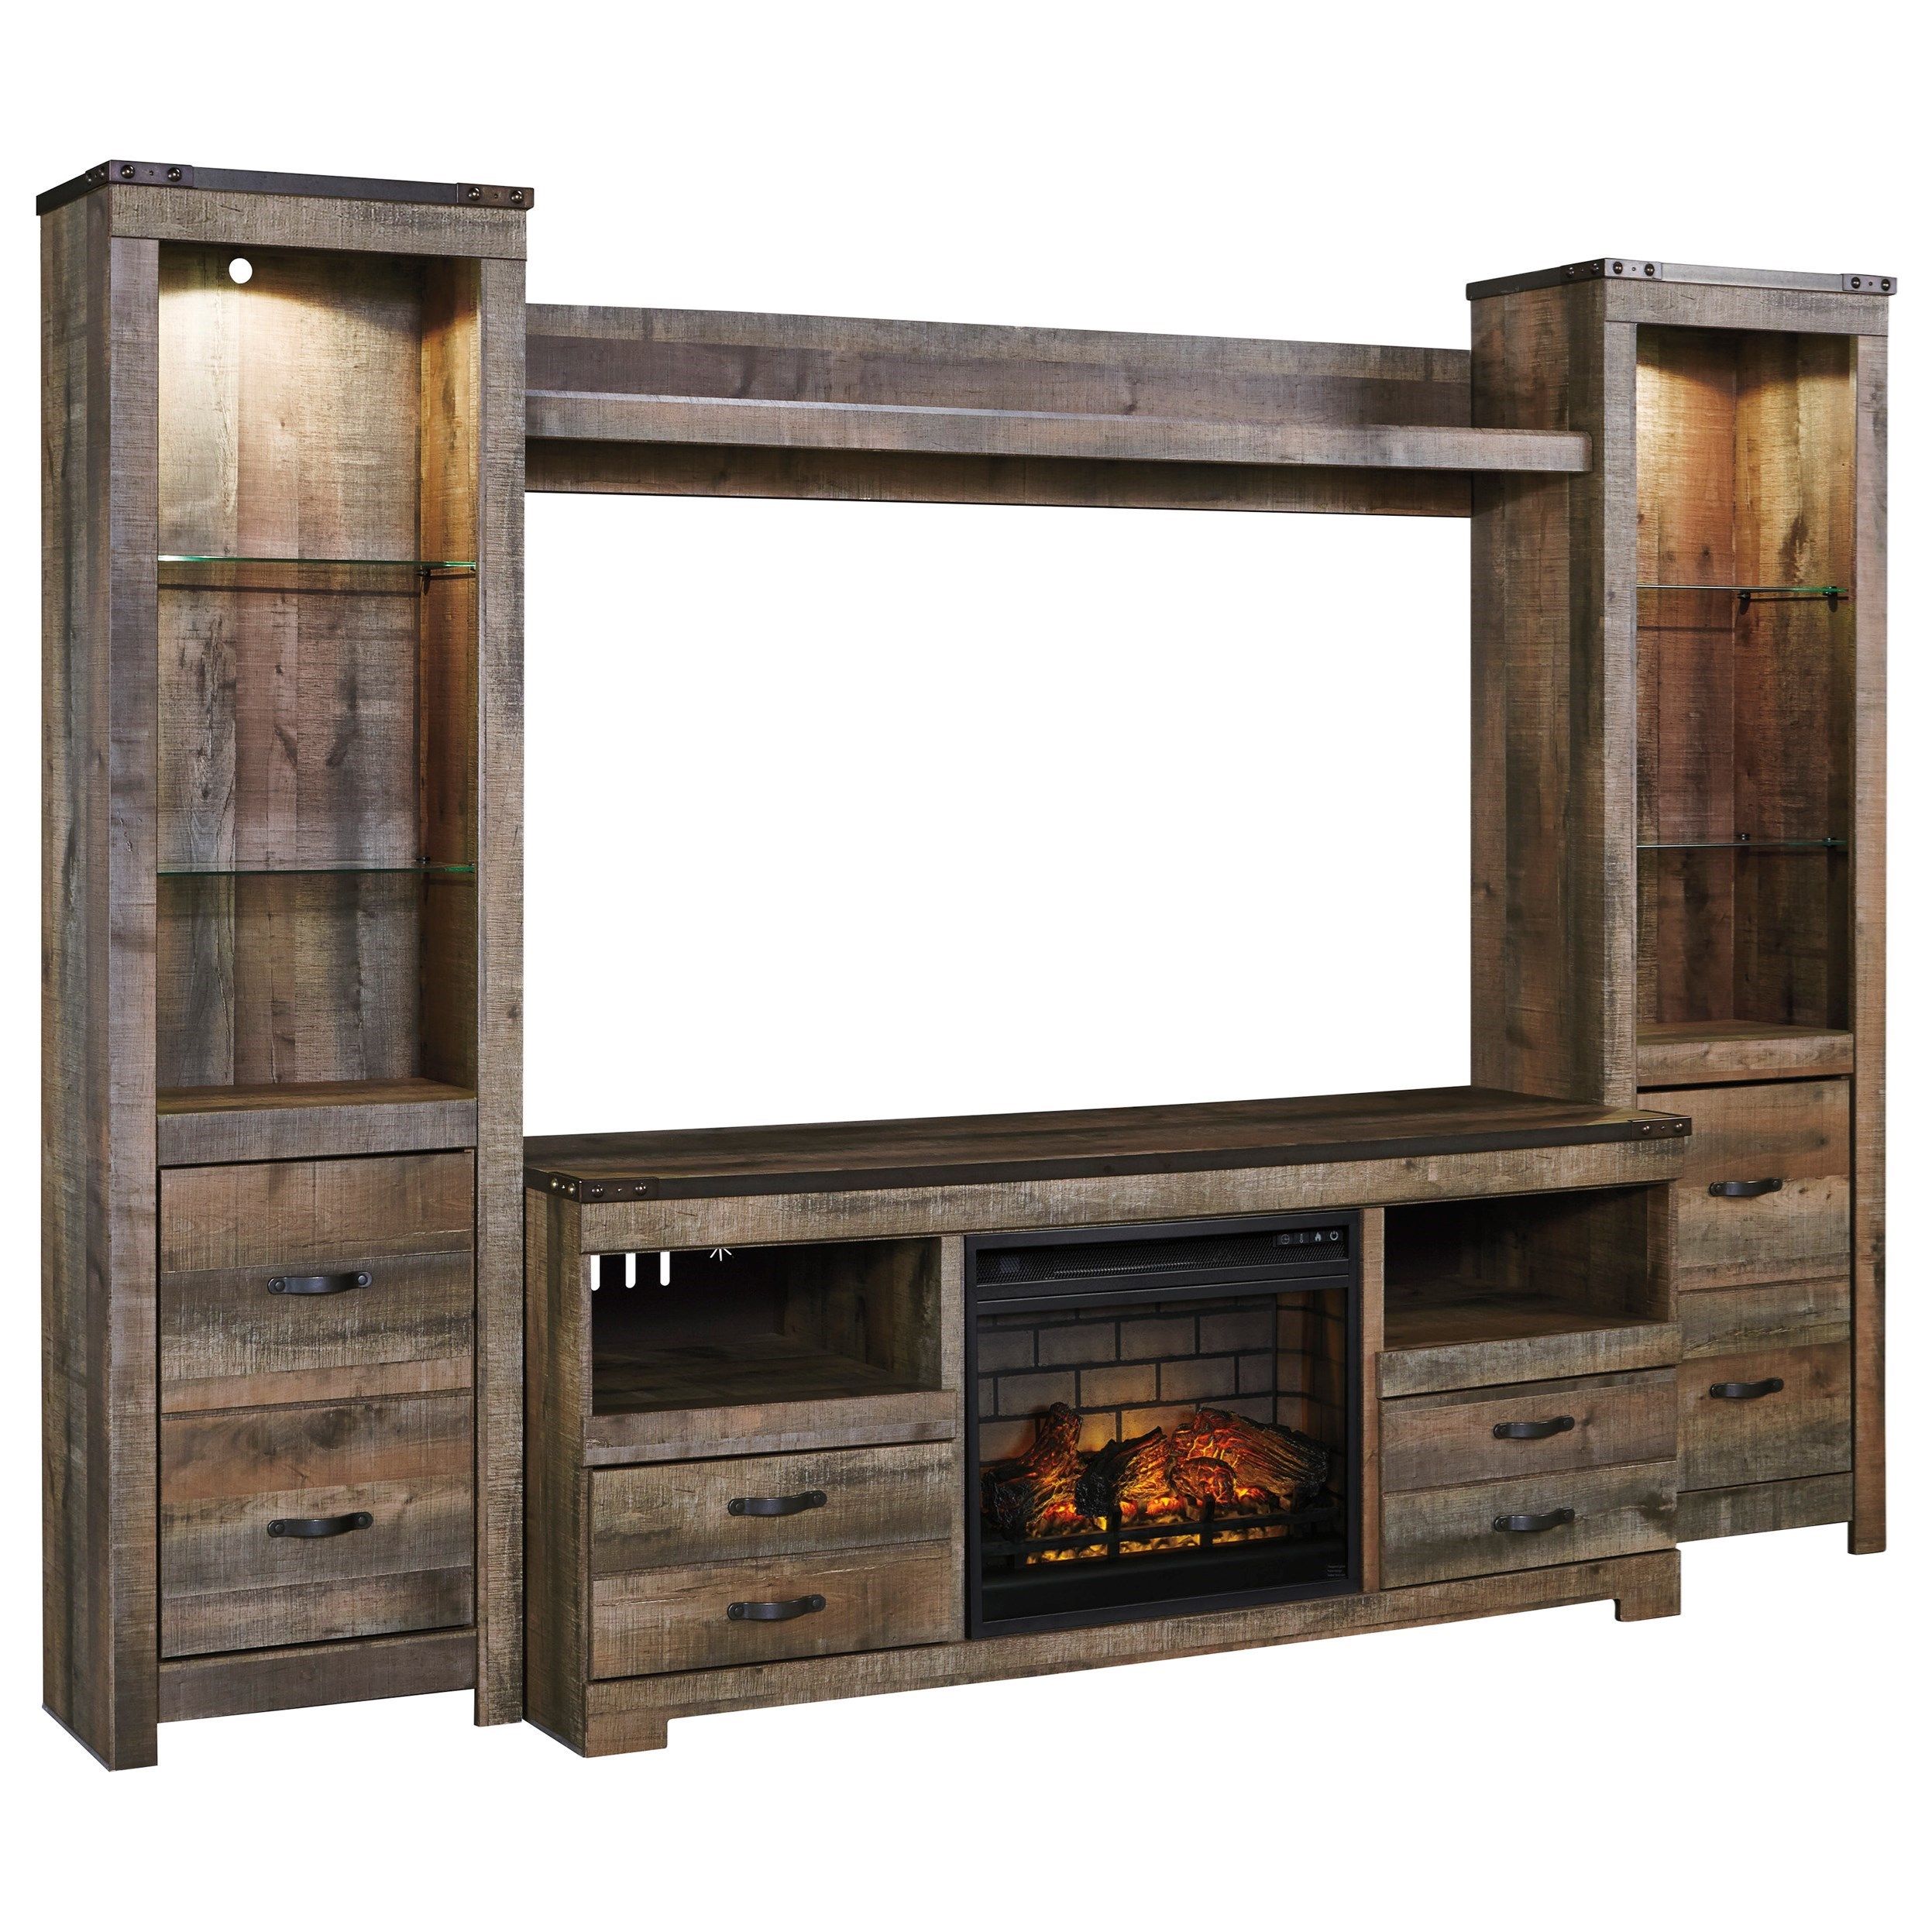 Signature Designashley Trinell W446w8 Rustic Large Tv Stand W/  Fireplace Insert, 2 Tall Piers, & Bridge | Factory Direct Furniture | Wall  Units With Entertainment Units With Bridge (View 2 of 15)